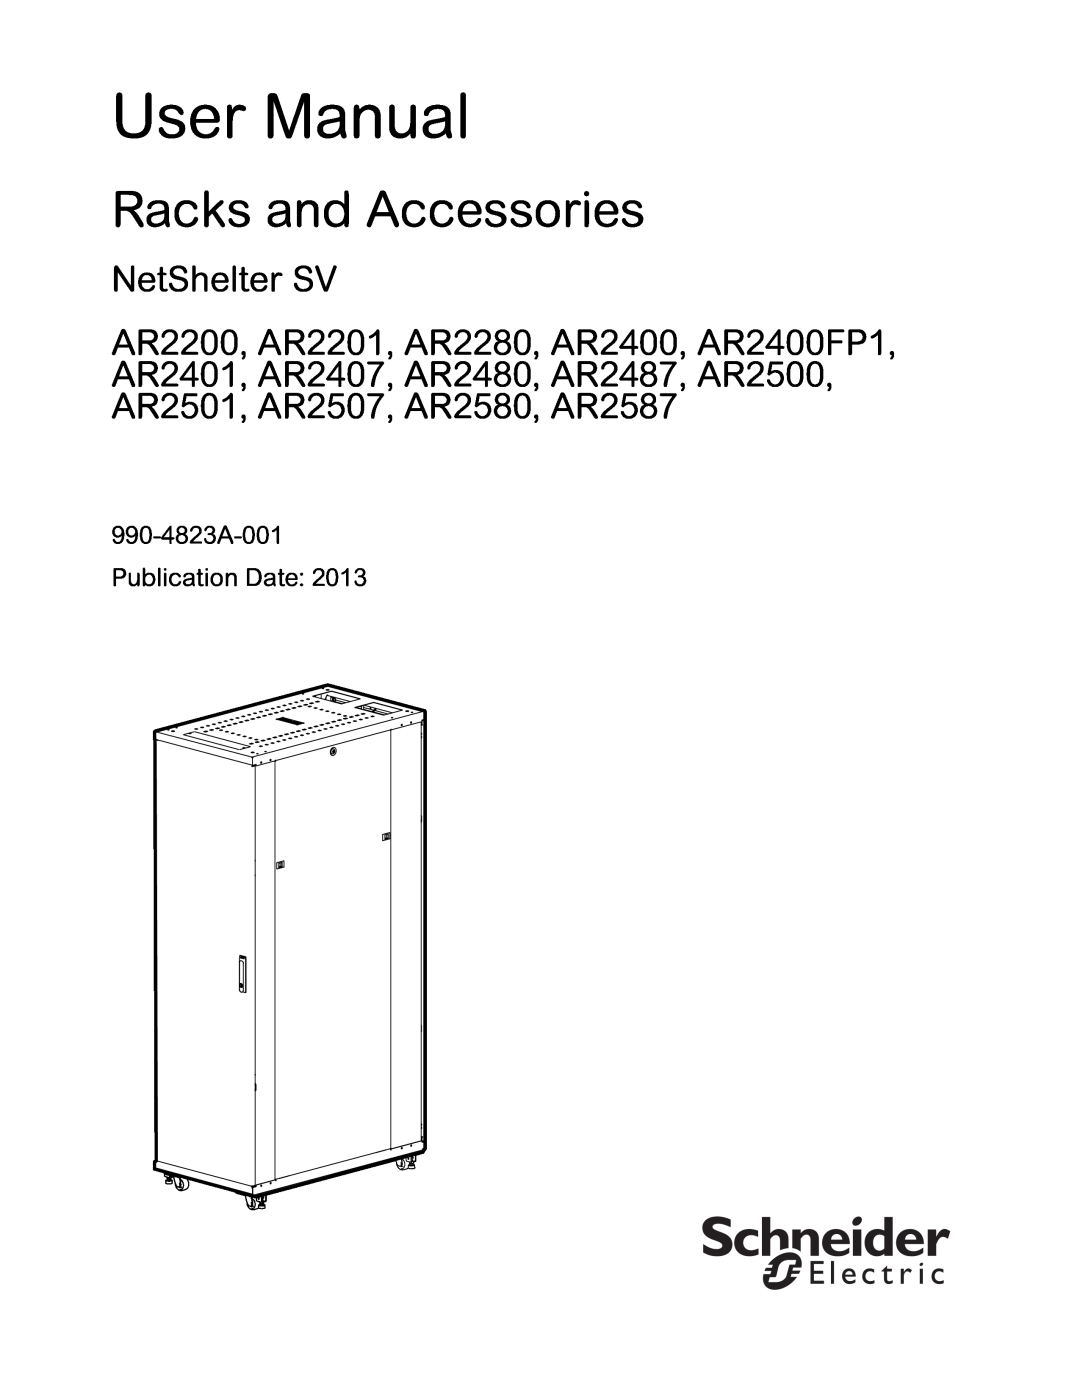 APC AR2400 user manual User Manual, Racks and Accessories, NetShelter SV, 990-4823A-001 Publication Date 